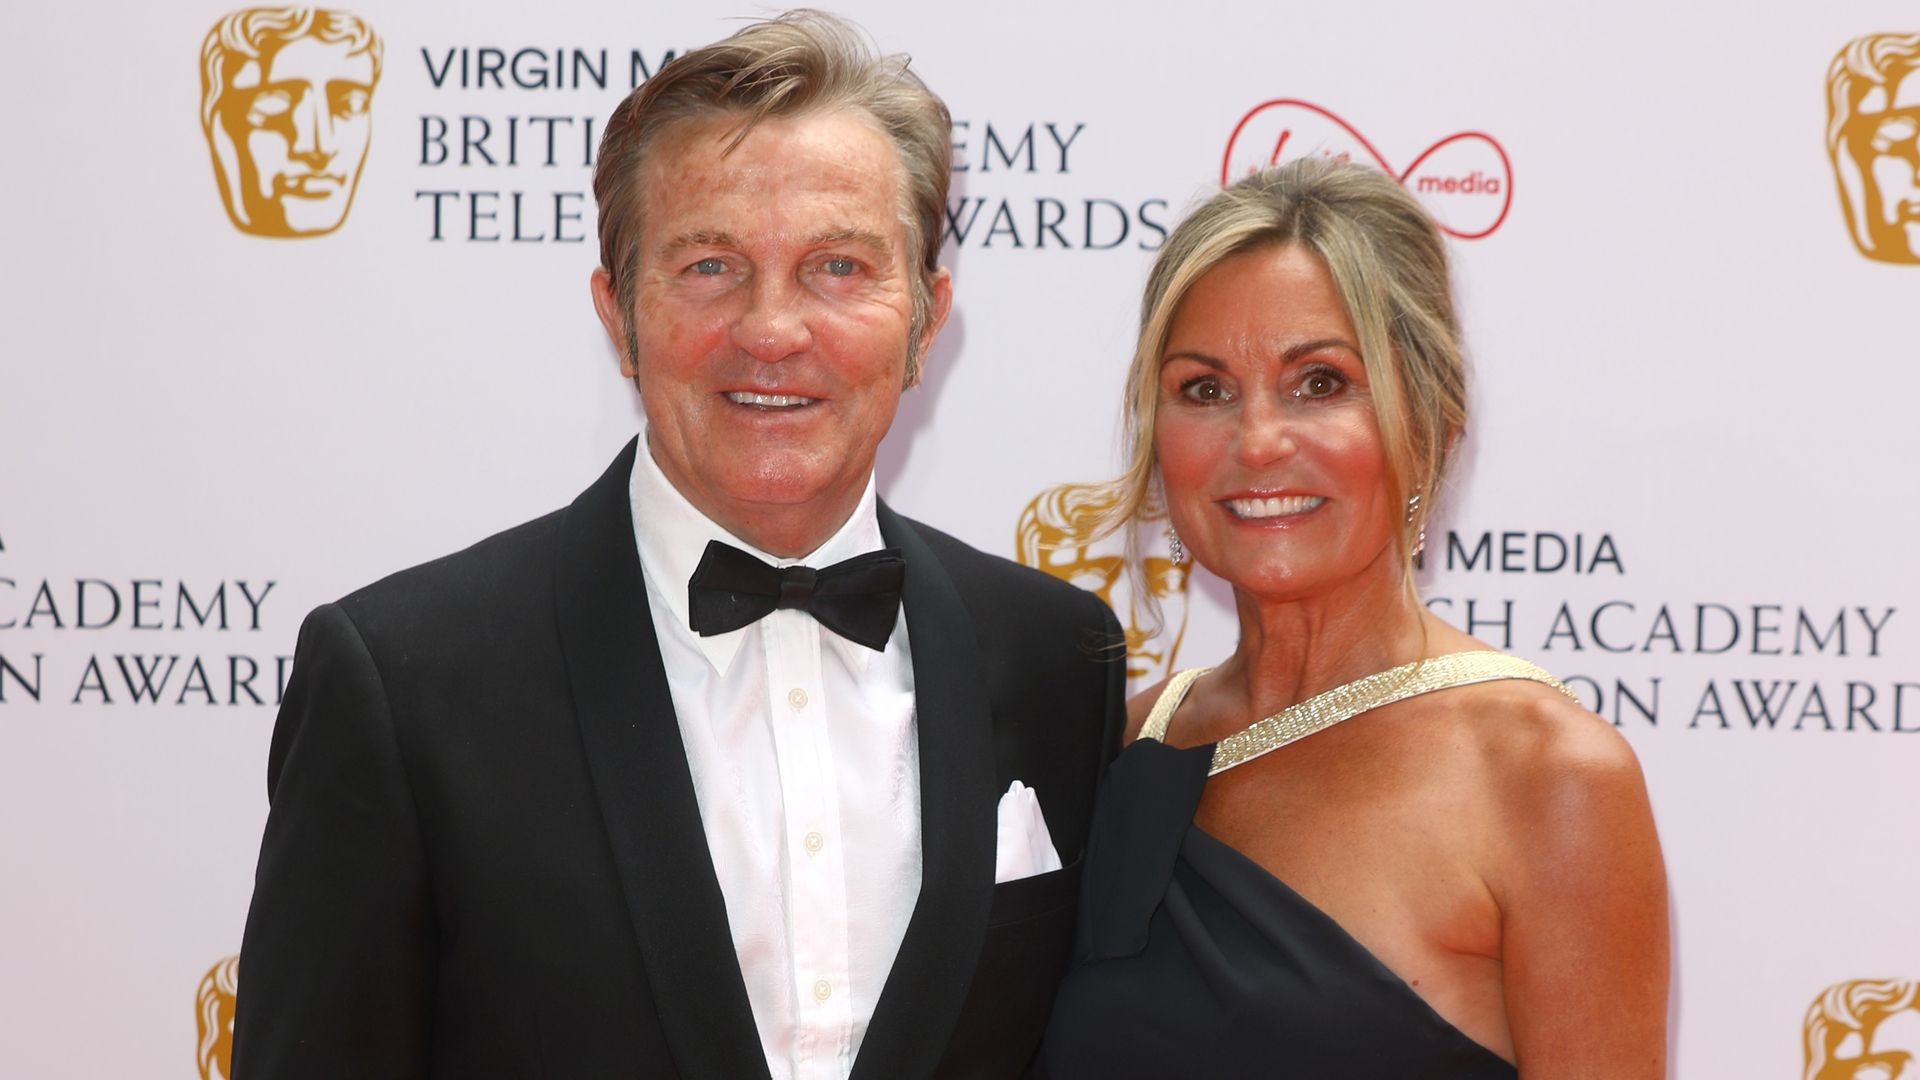 Meet Bradley Walsh's wife: find out everything you need to know about Donna Derby